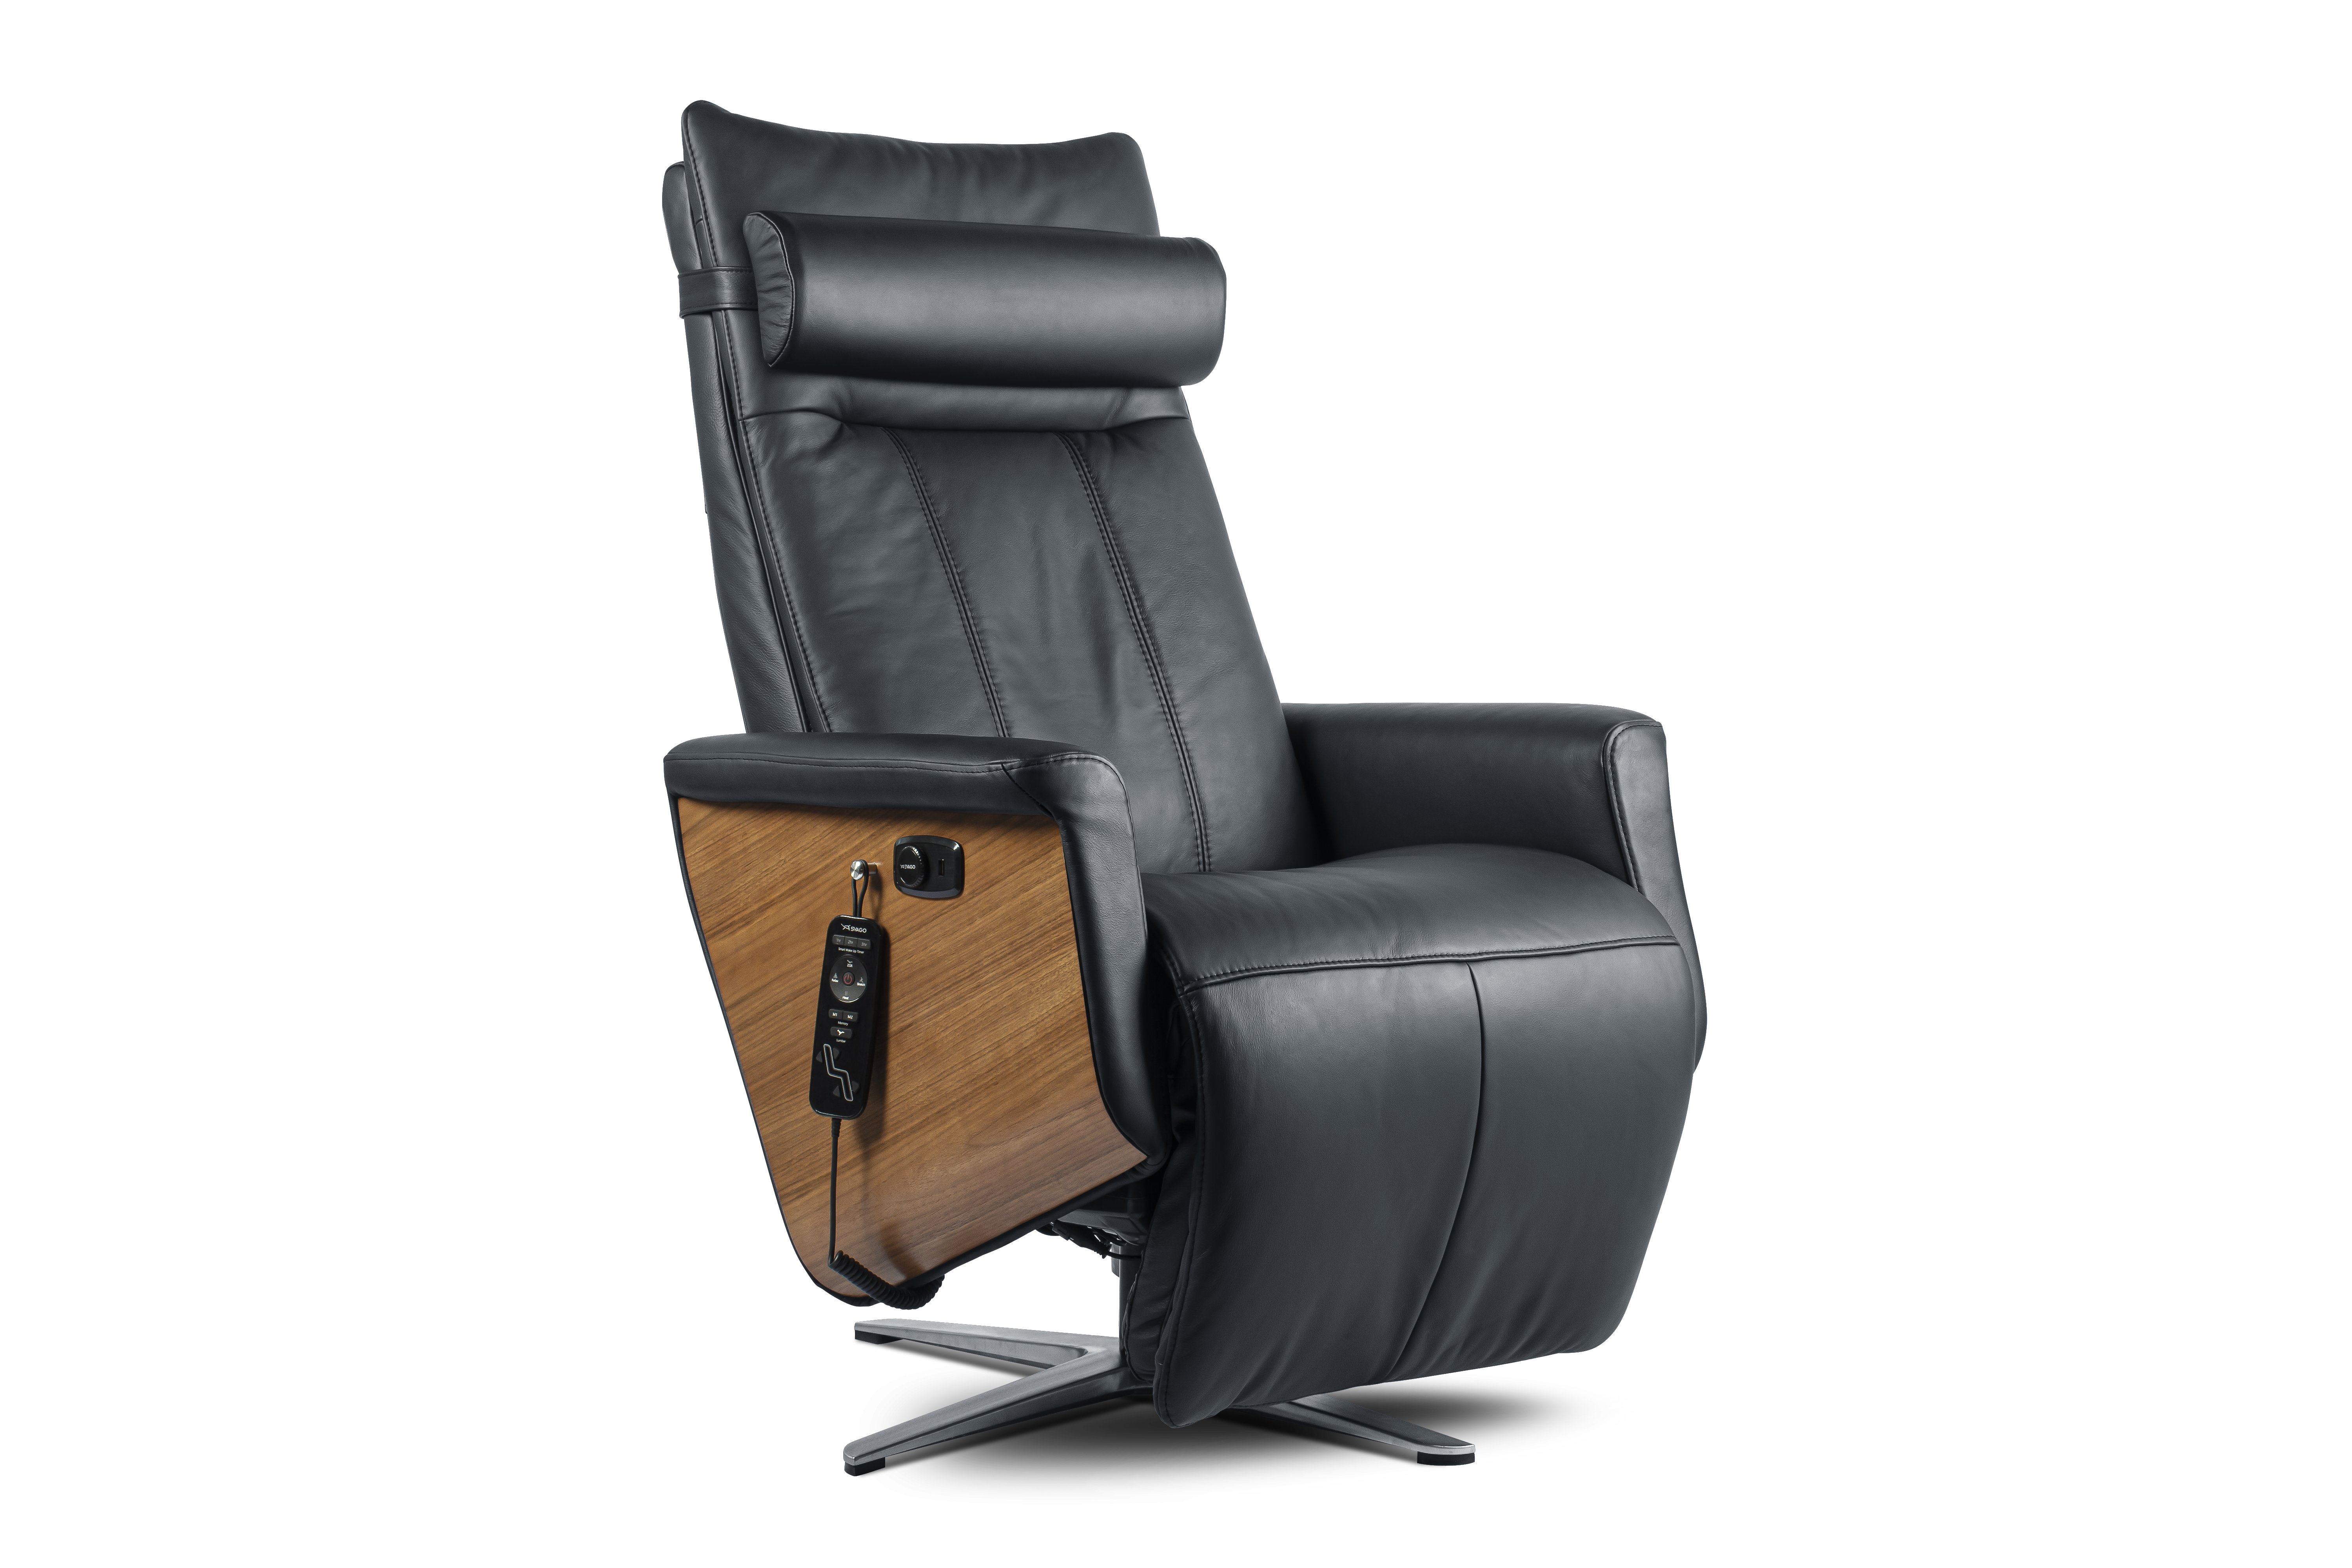 Photo of the Cozzia Svago SV500 chair.